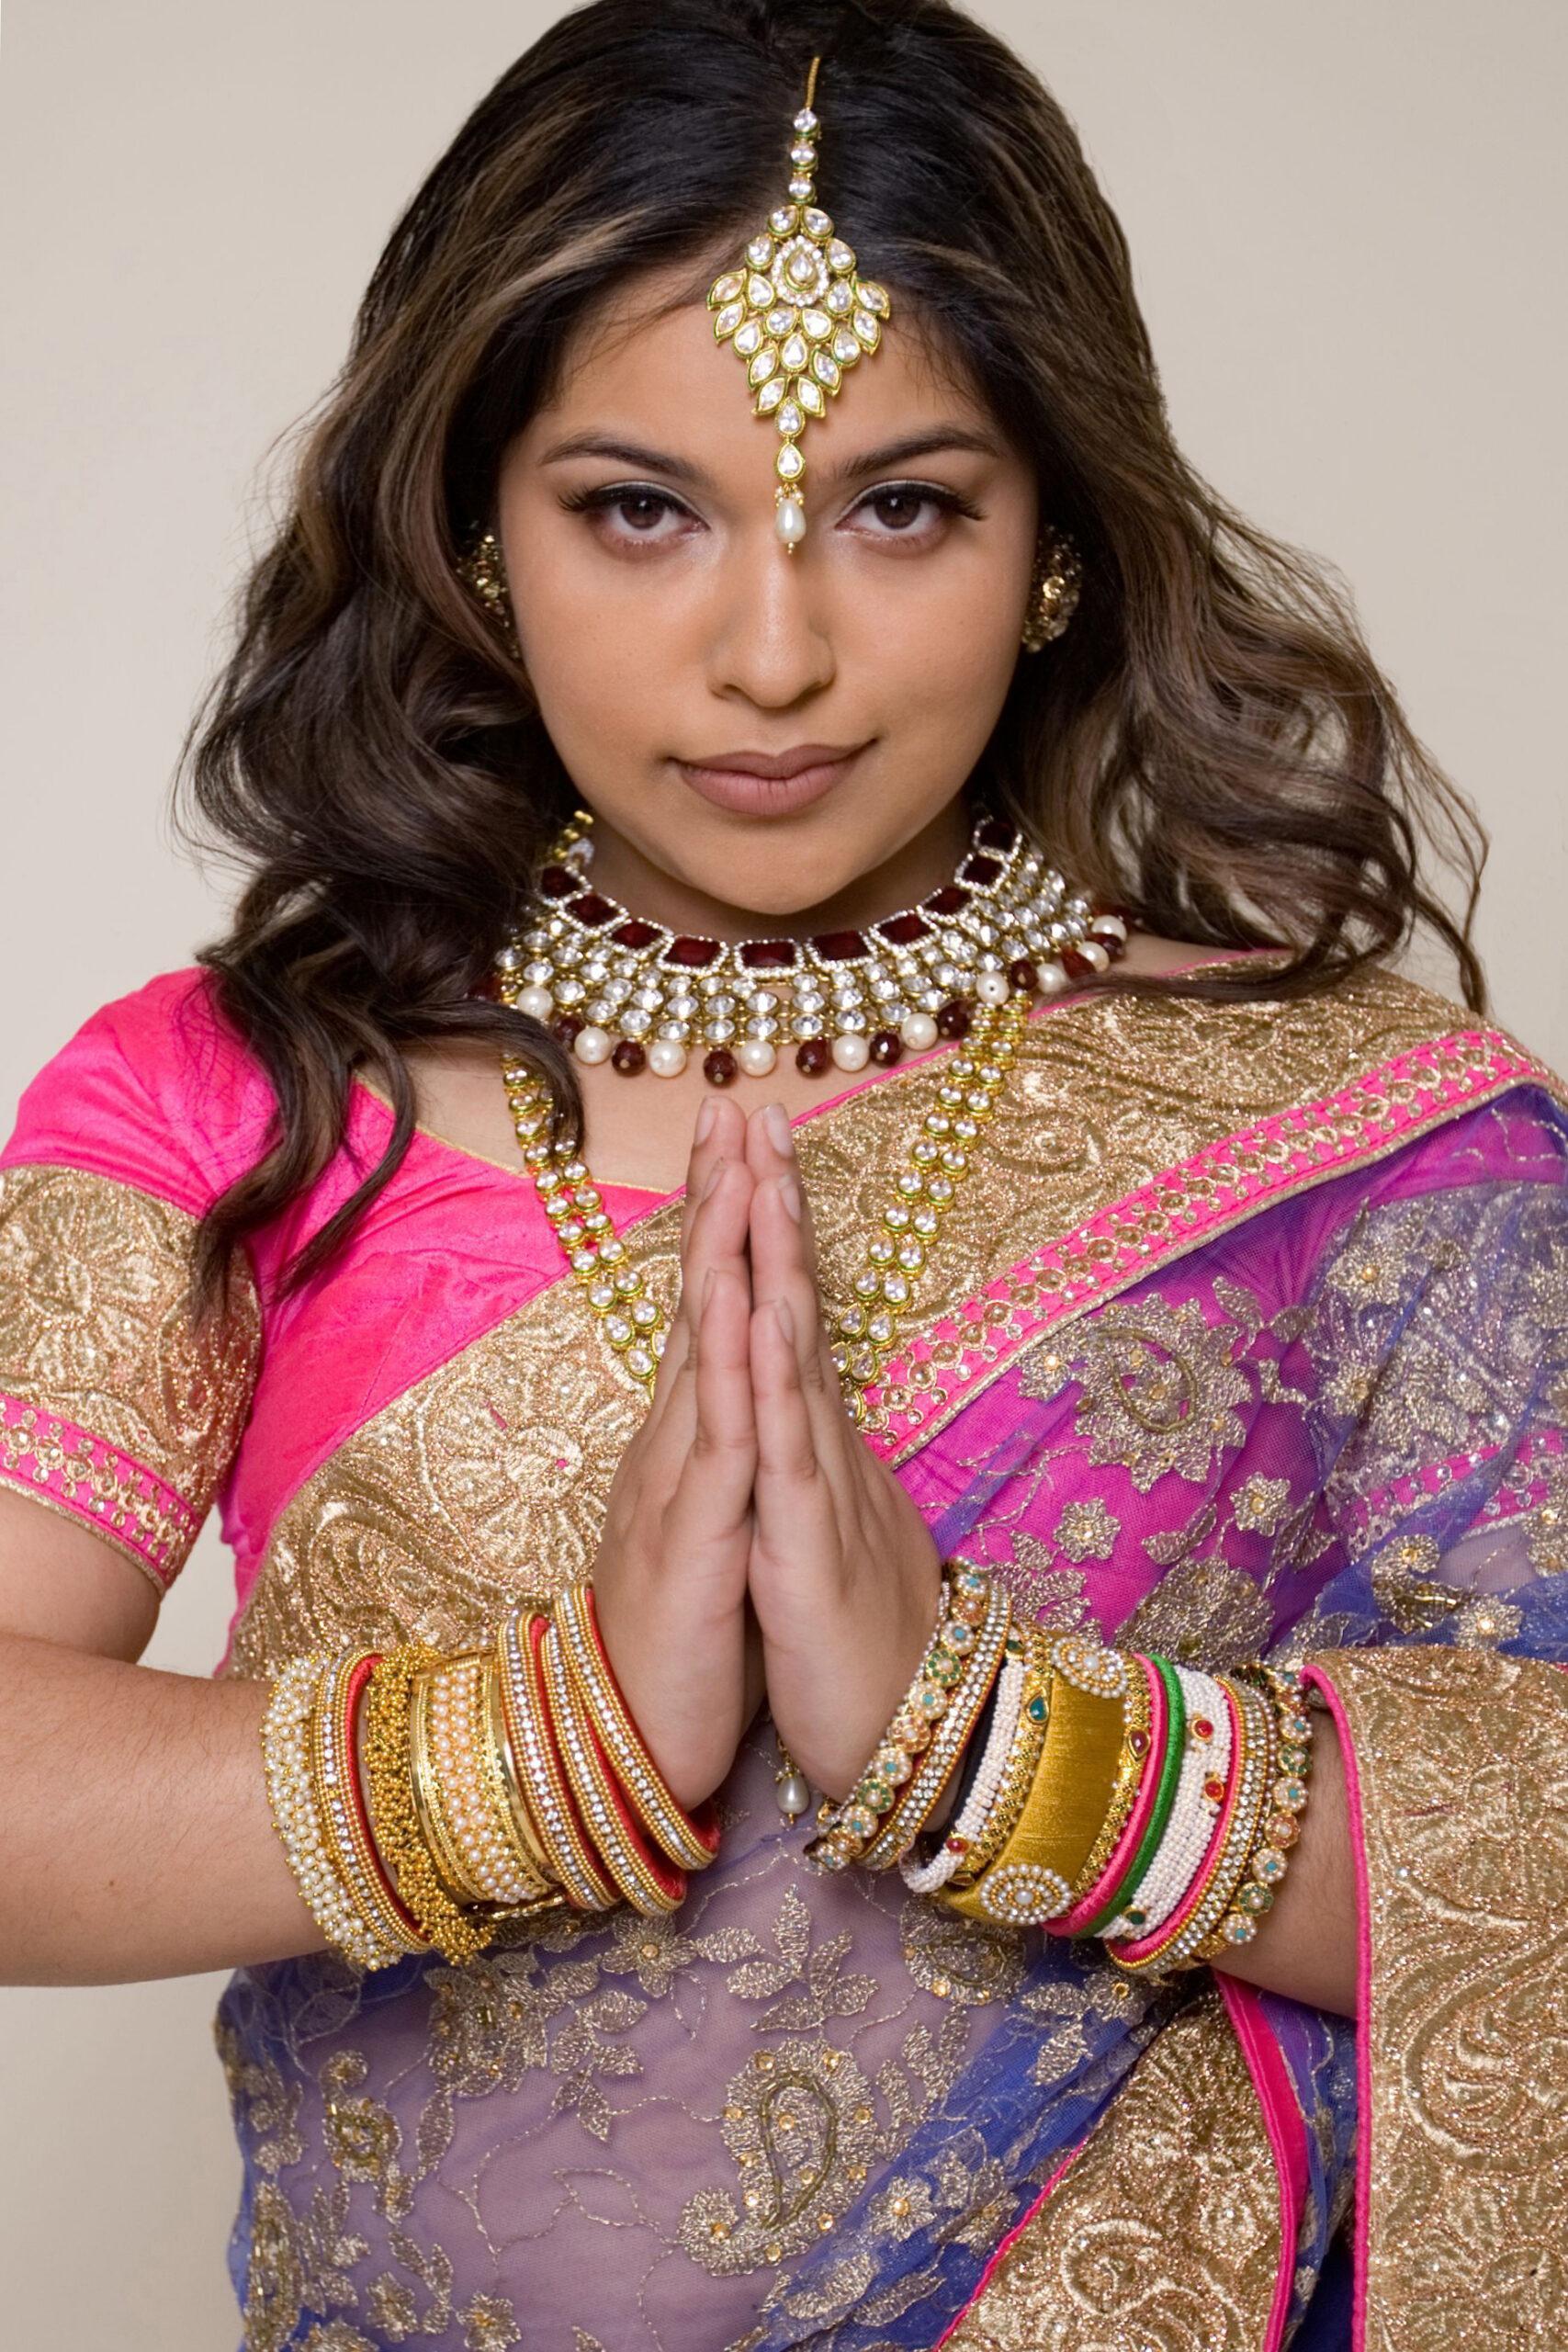 Indian Woman posing in her colorful sari and jewelry